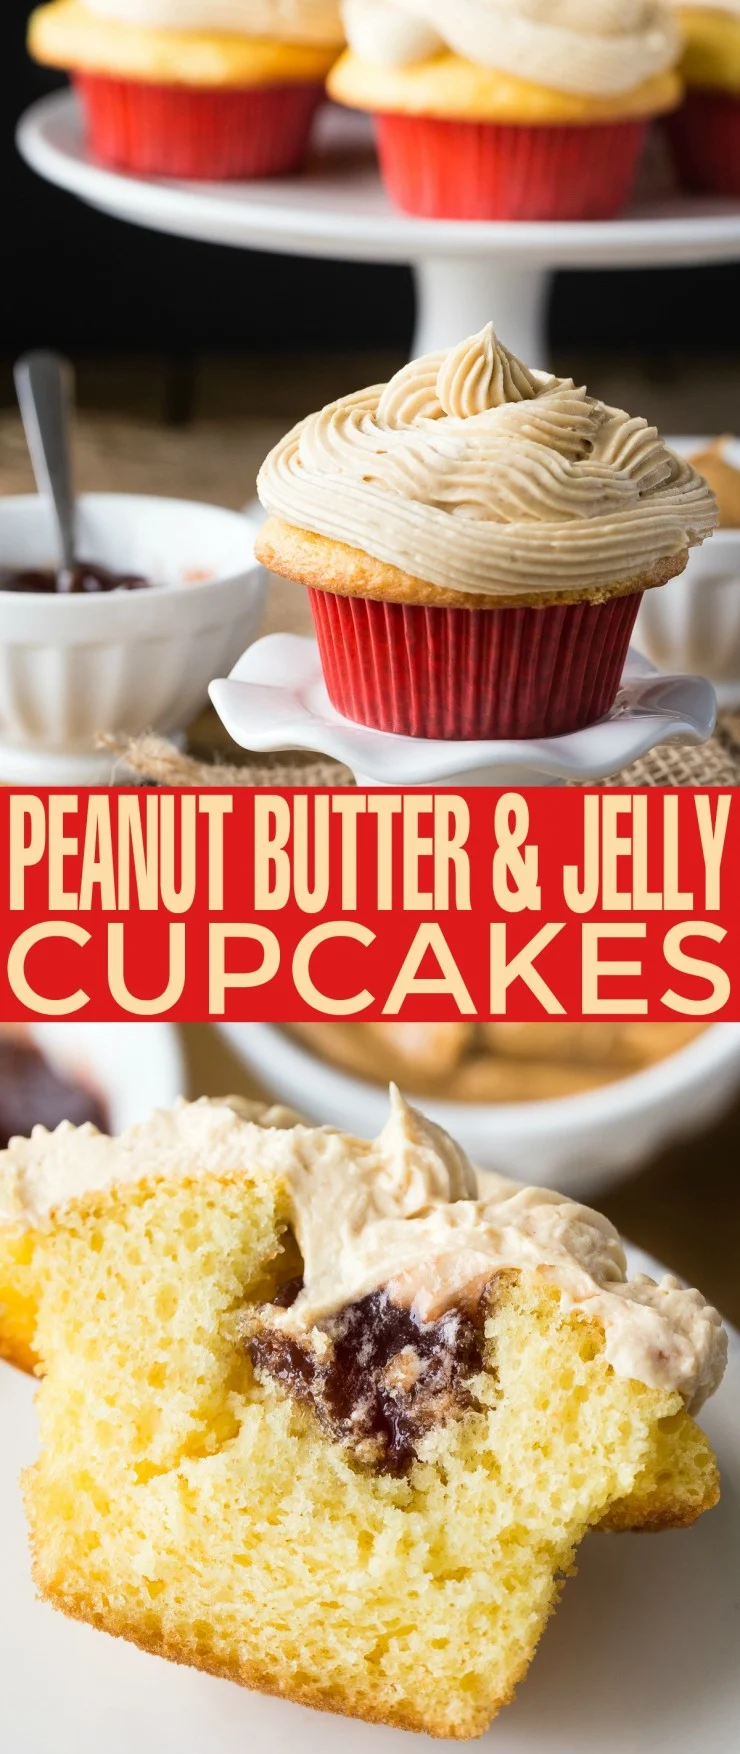 These Peanut Butter & Jelly Cupcakes turn a classic sandwich into an easy to make and very nostalgic cupcake. Perfect for all the pb & j lovers out there!